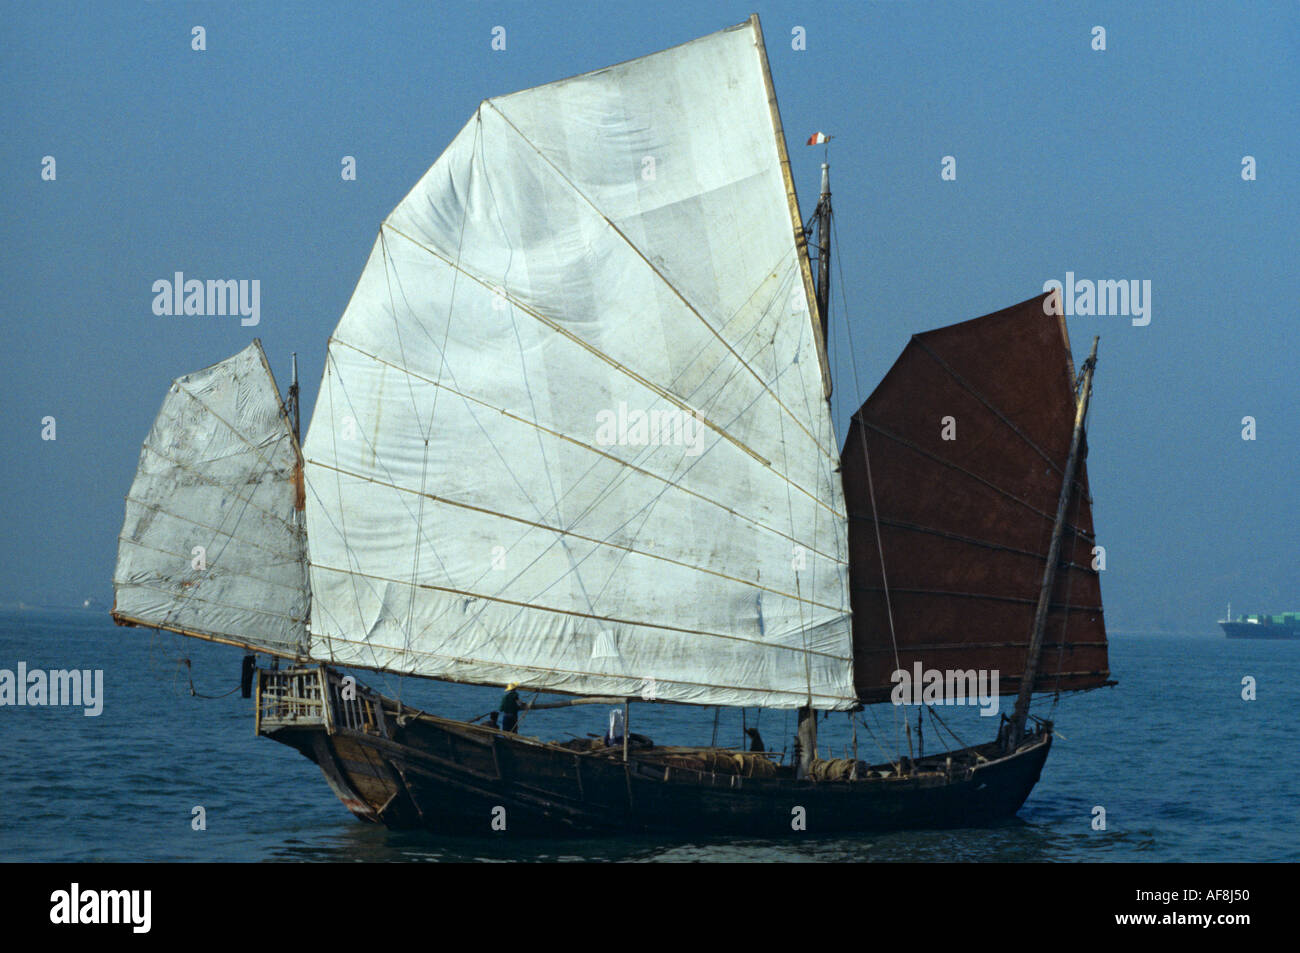 Stern & side view of traditional genuine old local sailing junk in the late 1970s in Victoria Harbour Hong Kong Island China Stock Photo